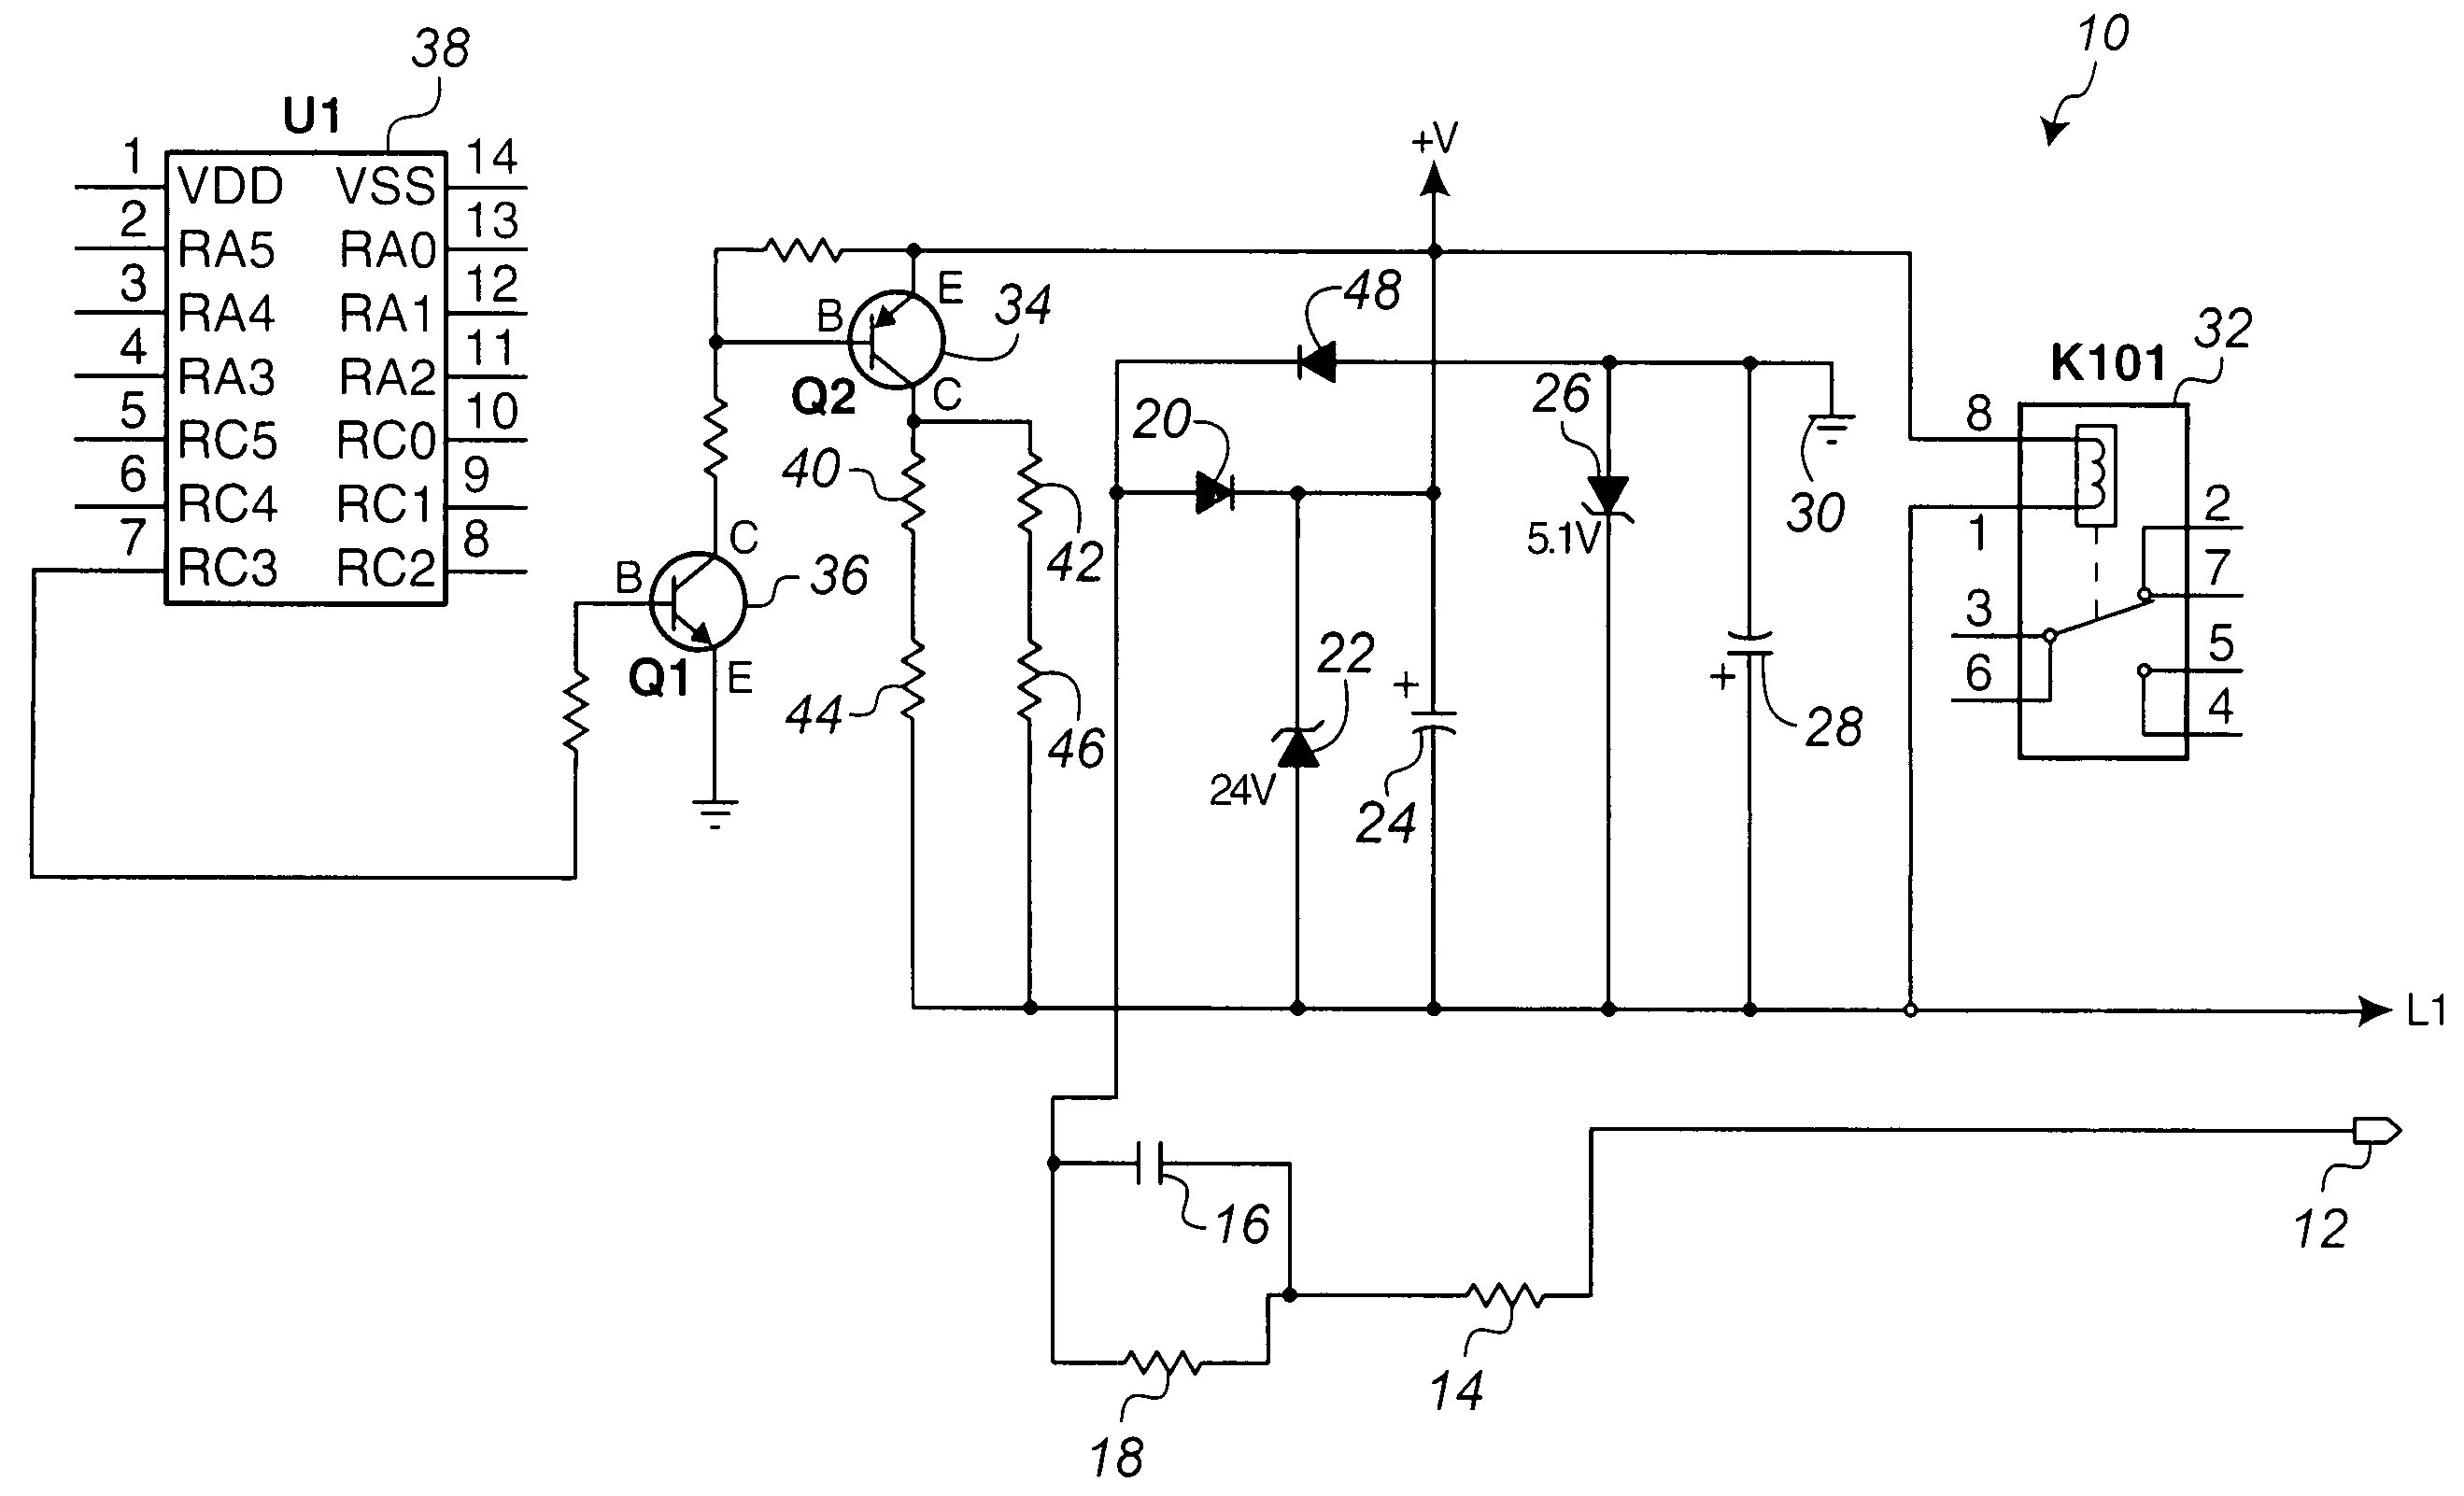 Adaptive defrost control circuit with relay power saving feature